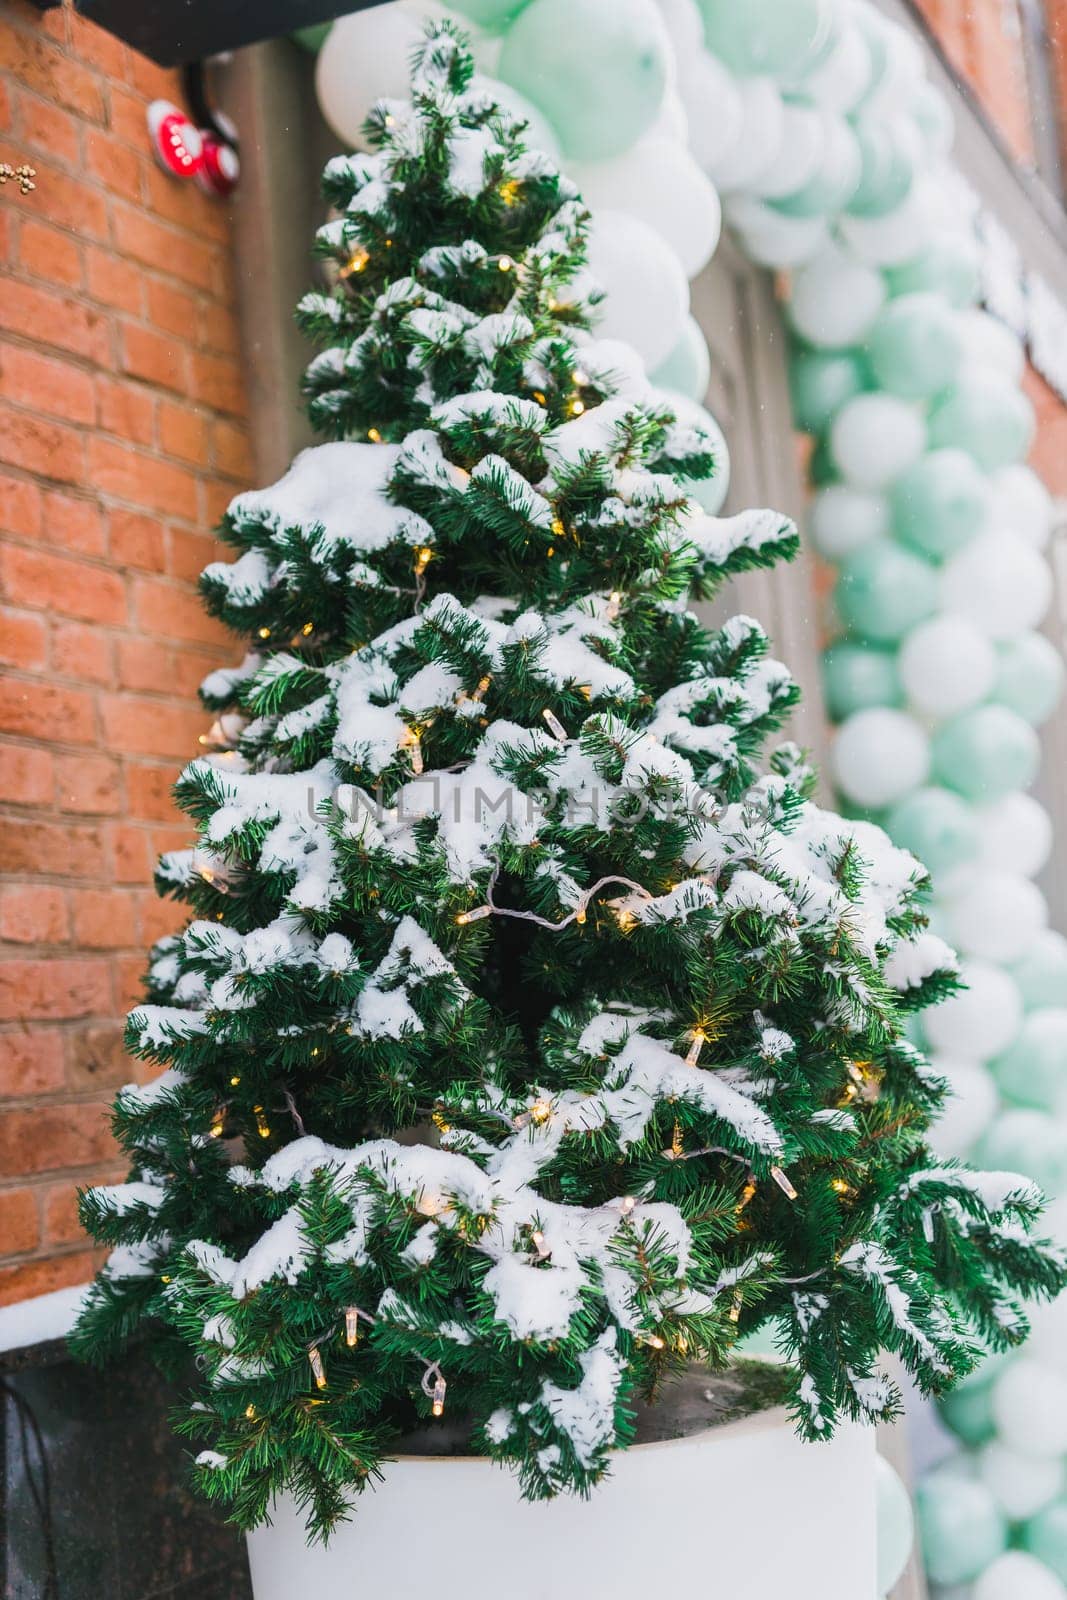 Stylish decorated christmas tree outdoor near store window with snow. Winter holidays and decor for xmas by Satura86